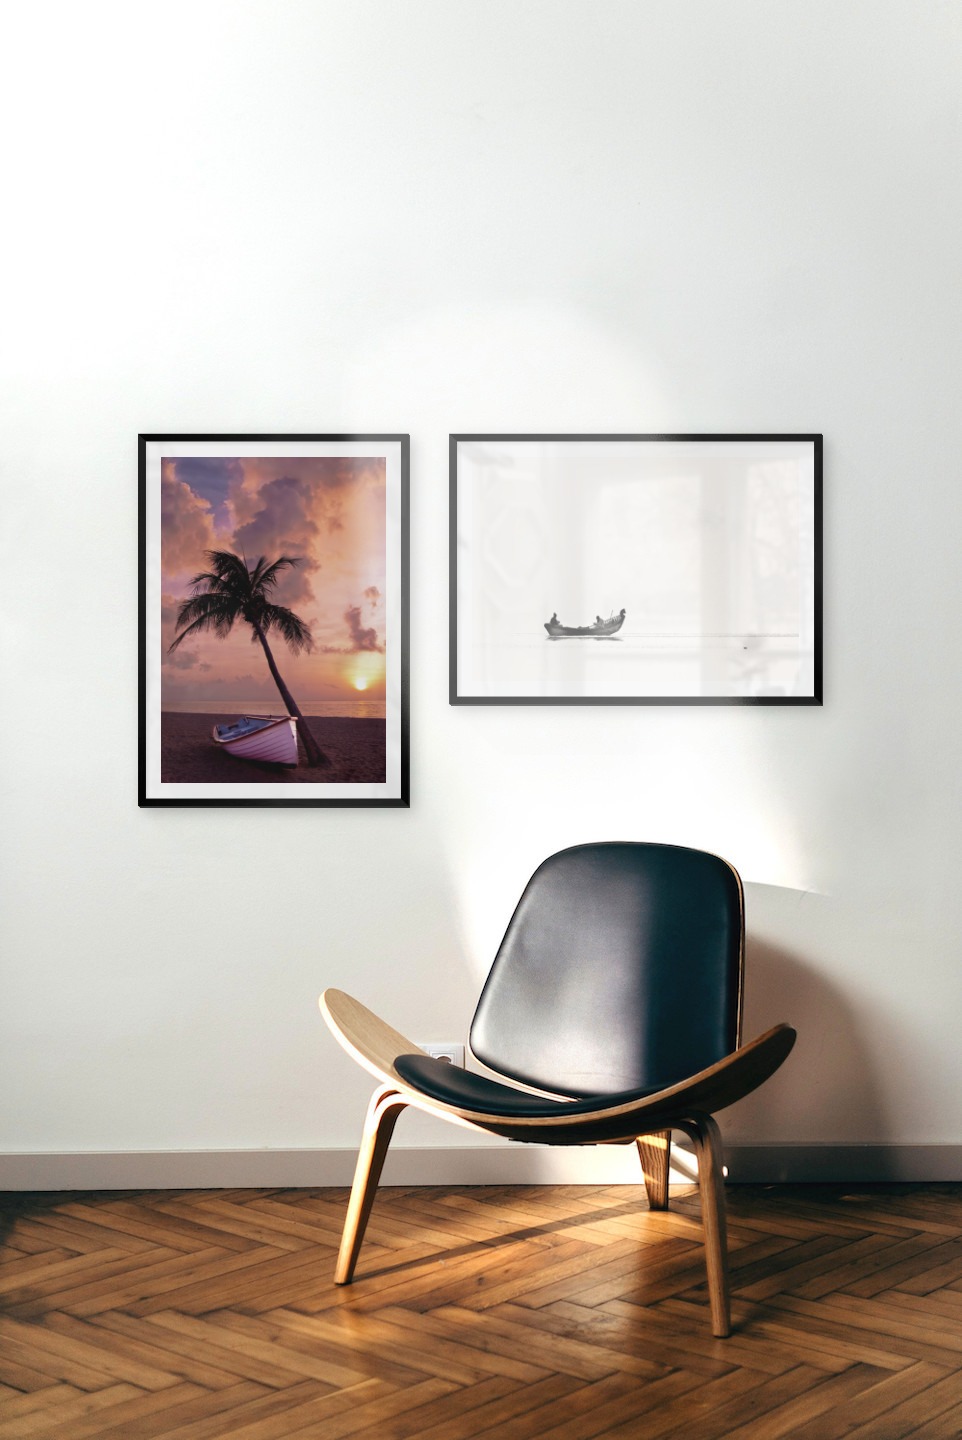 Gallery wall with picture frames in black in sizes 50x70 with prints "Palm on the beach" and "People in boat"